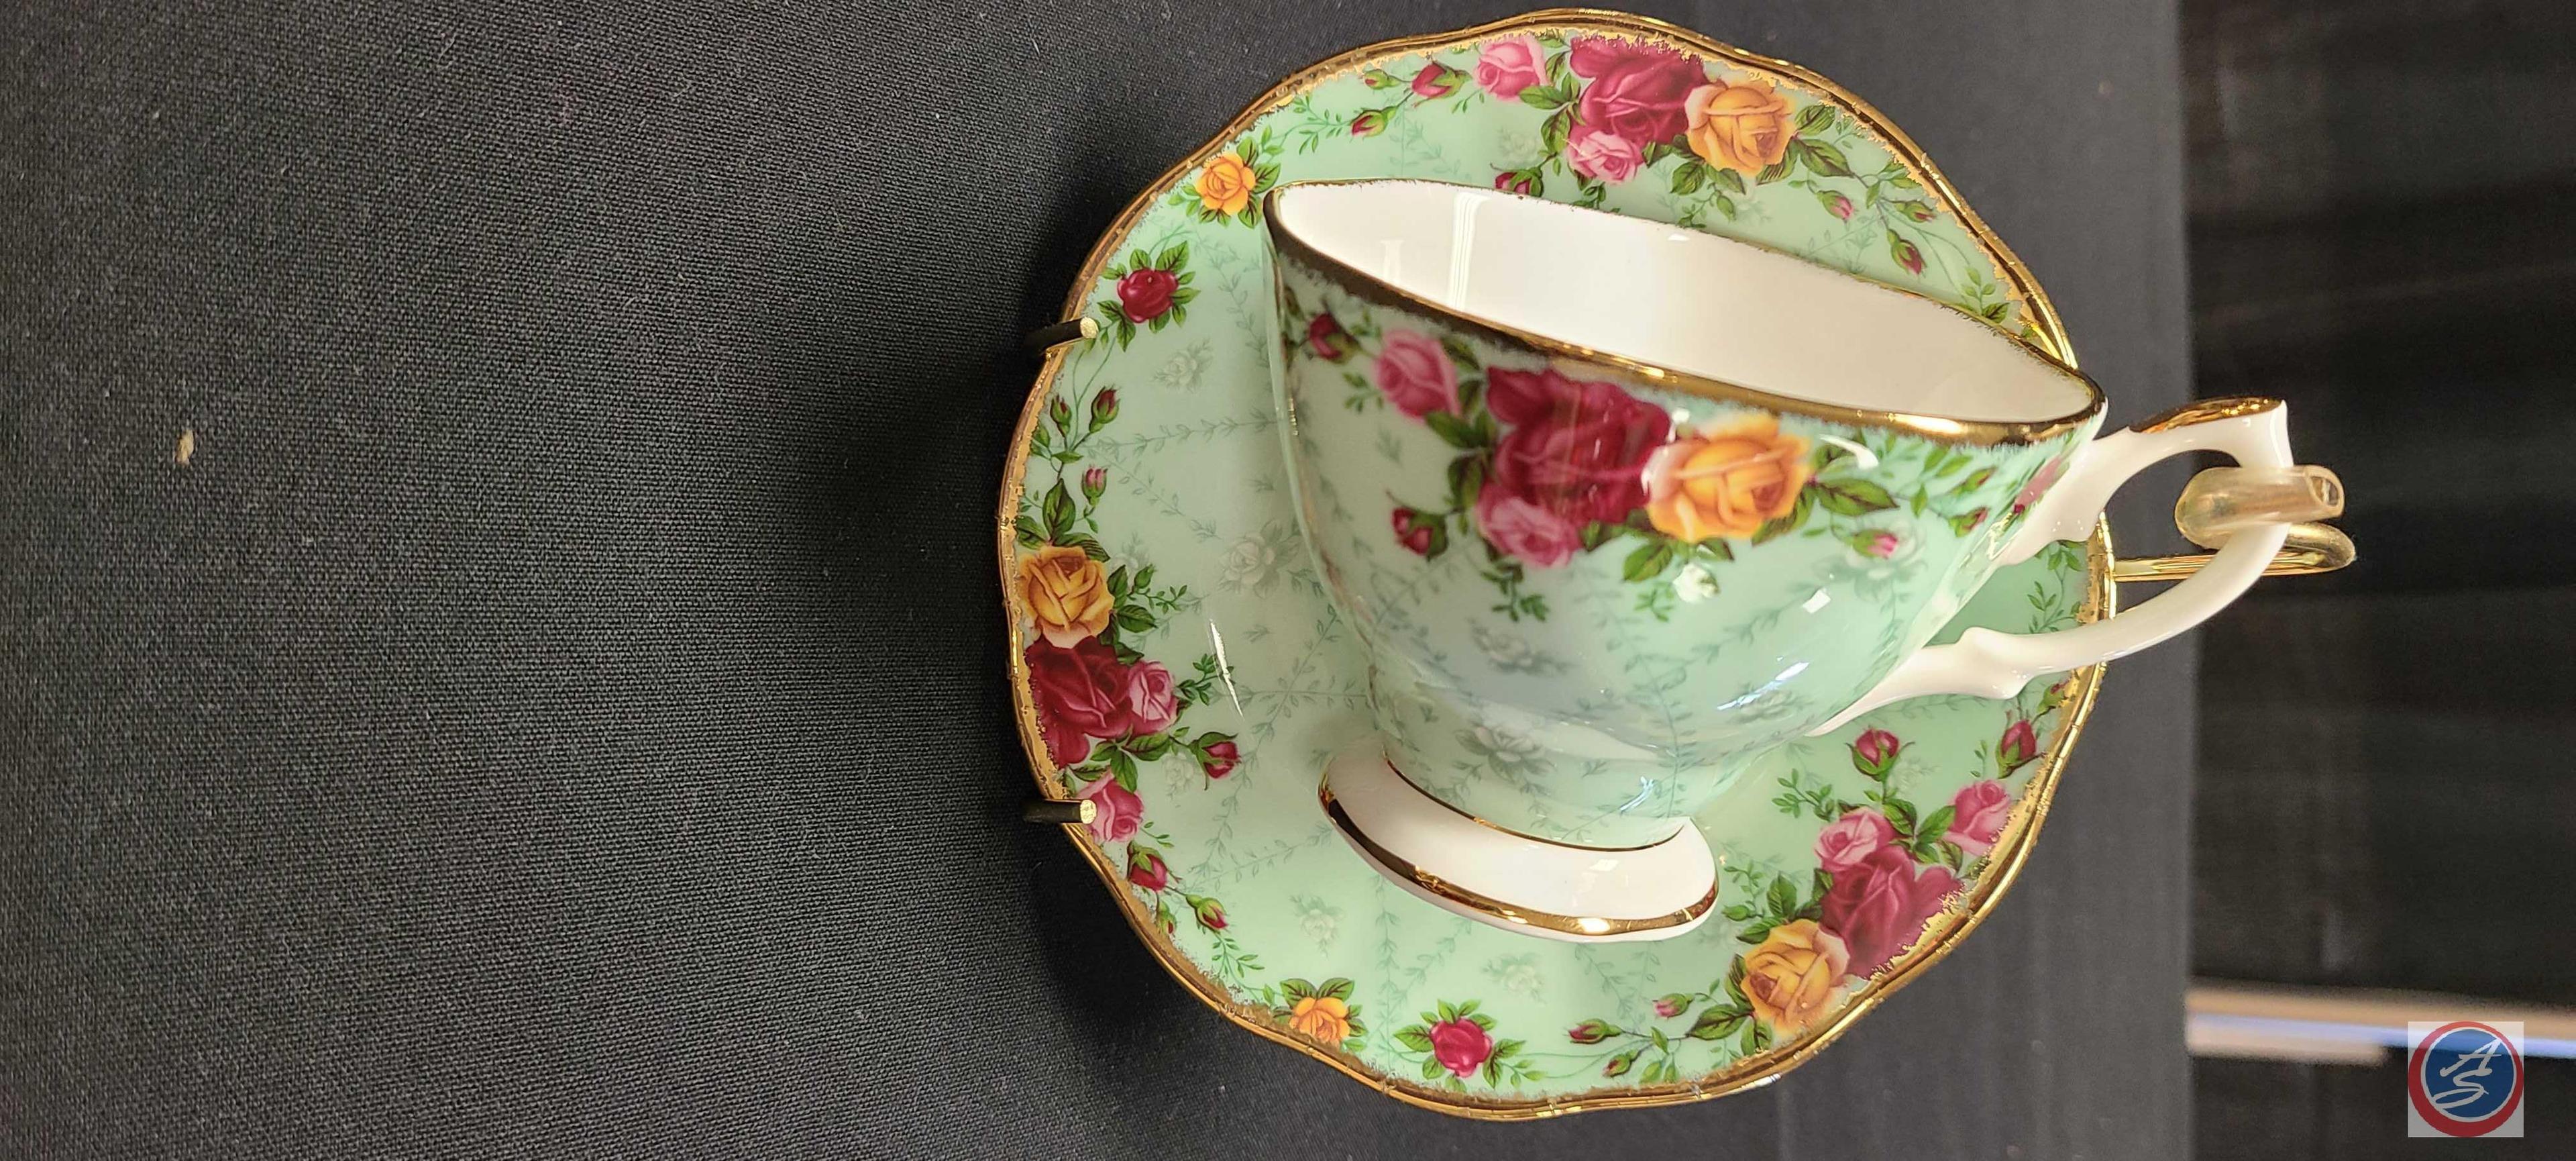 (1) Flat of assorted Items: (1) Old Country Roses Peppermint Damask royal Albert Bone China Tea Cup